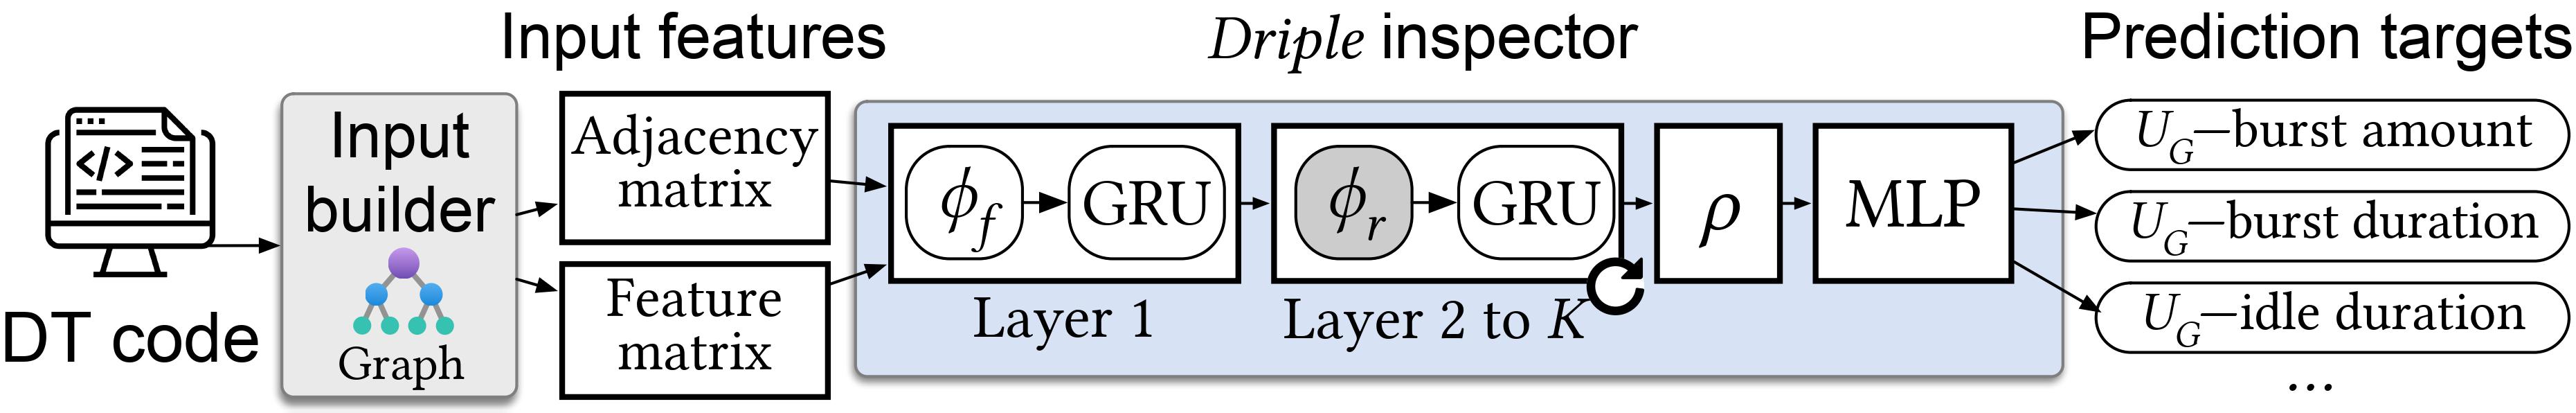 *Driple* structure